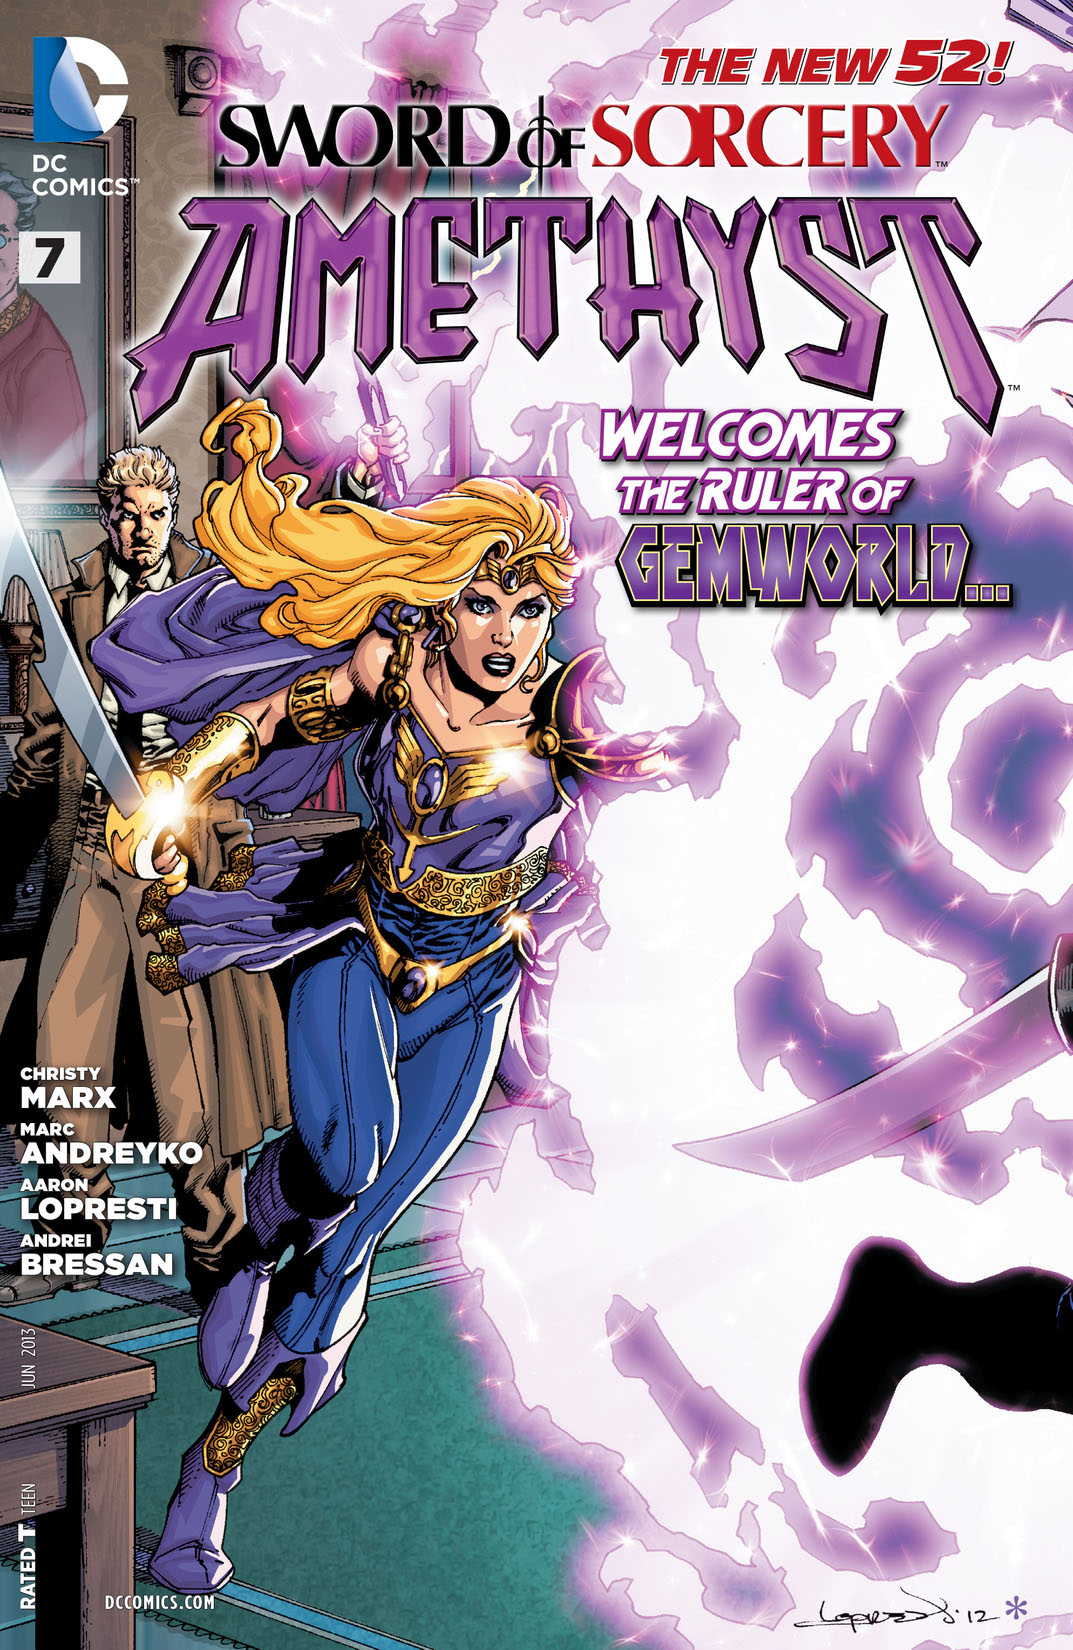 Sword of Sorcery #7 preview images